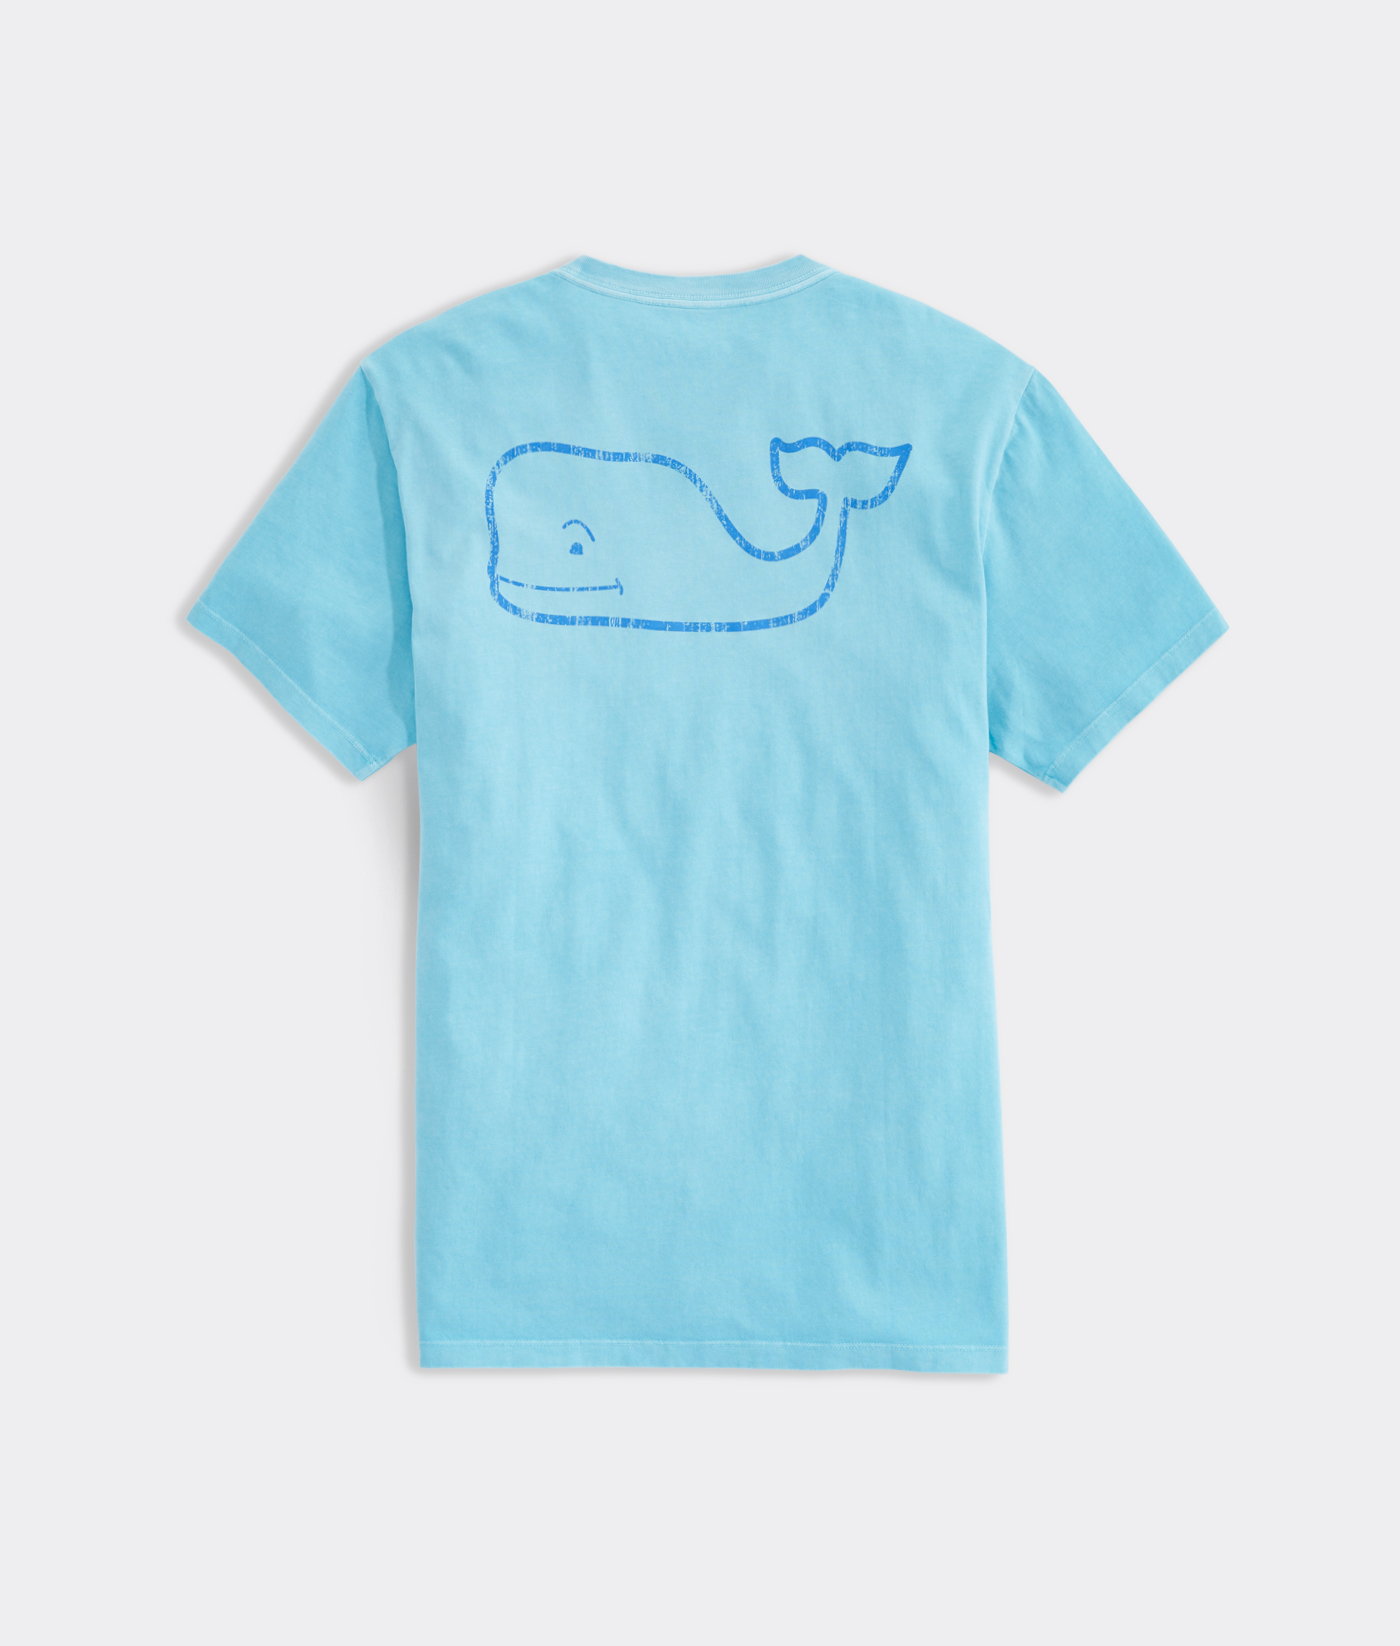 Shop Neon Garment Dyed Vintage Whale Short-Sleeve Pocket Tee at ...